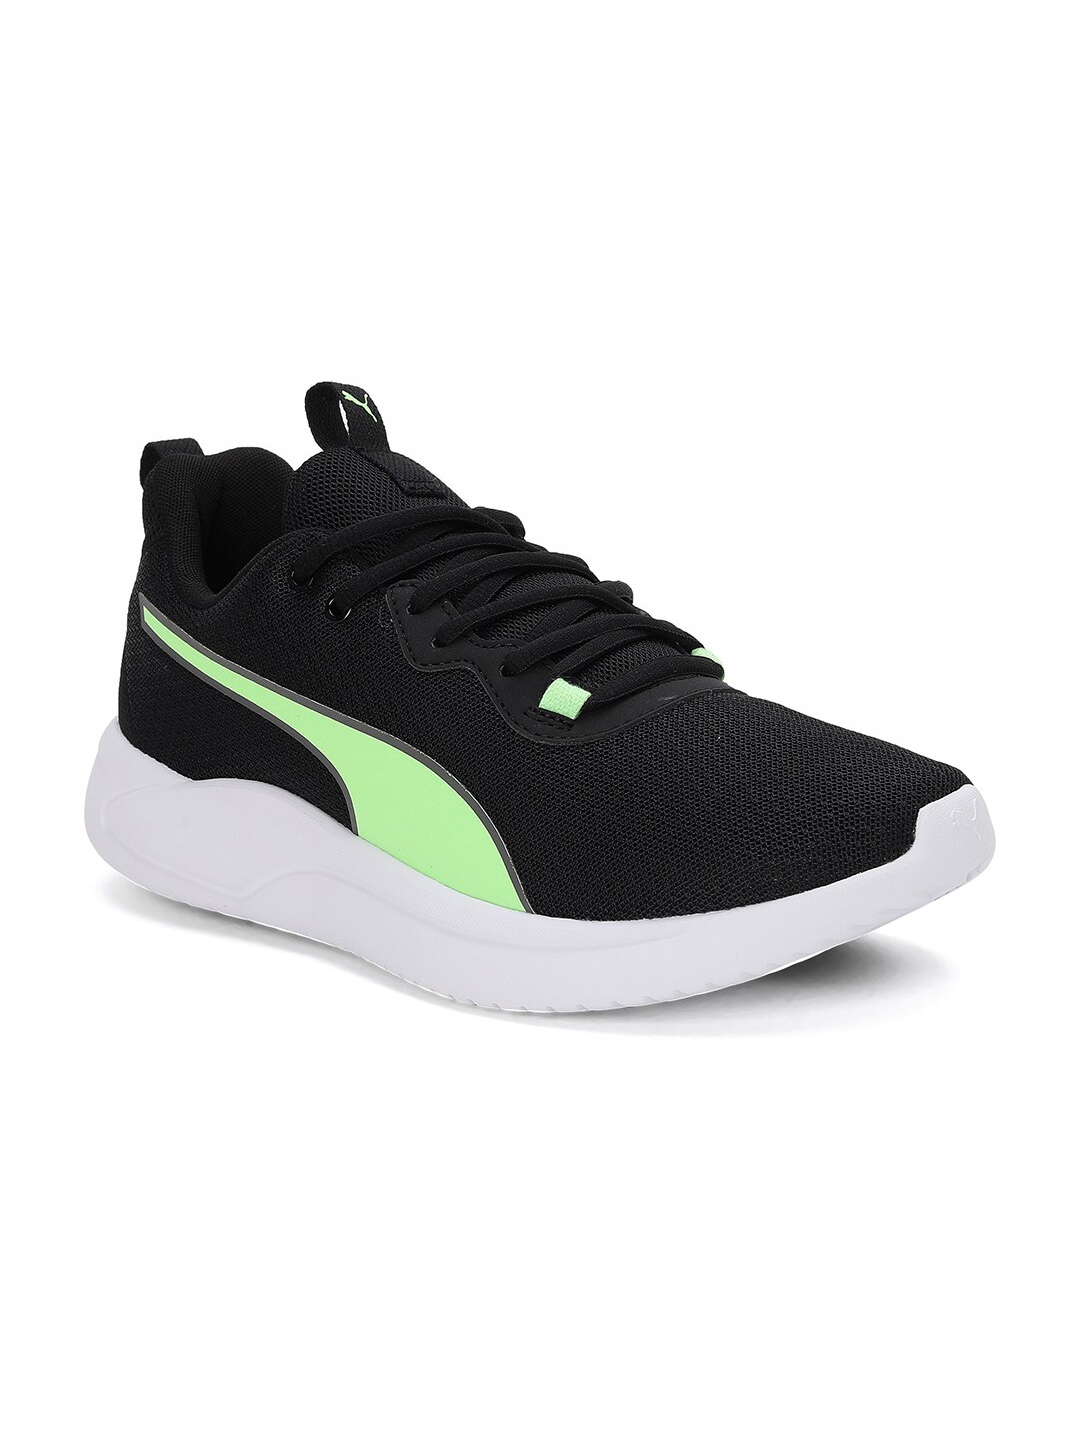 Buy Puma Resolve Modern Running Shoes - Sports Shoes for Unisex ...